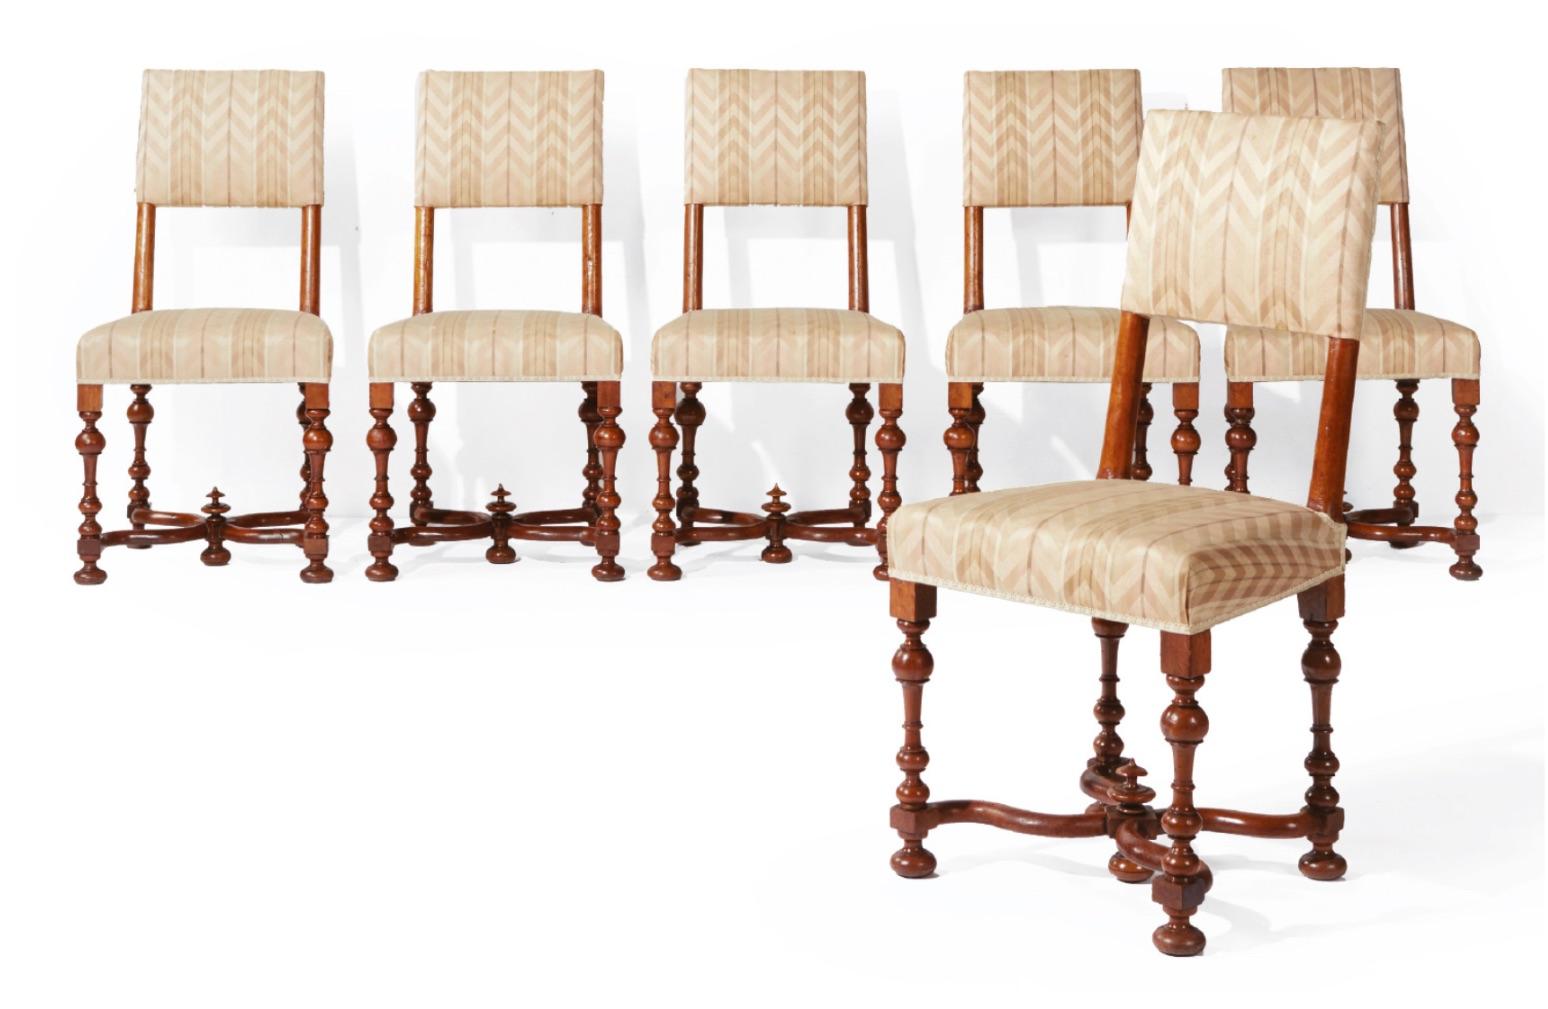 Set of six Louis XIII chairs
Origin: France
Period: 17th century, blond walnut wood
Very good condition.

Those tiny and elegant chairs with trapezoidal seats stand on four baluster feet. They are linked with a curved X-shaped crossbar centered